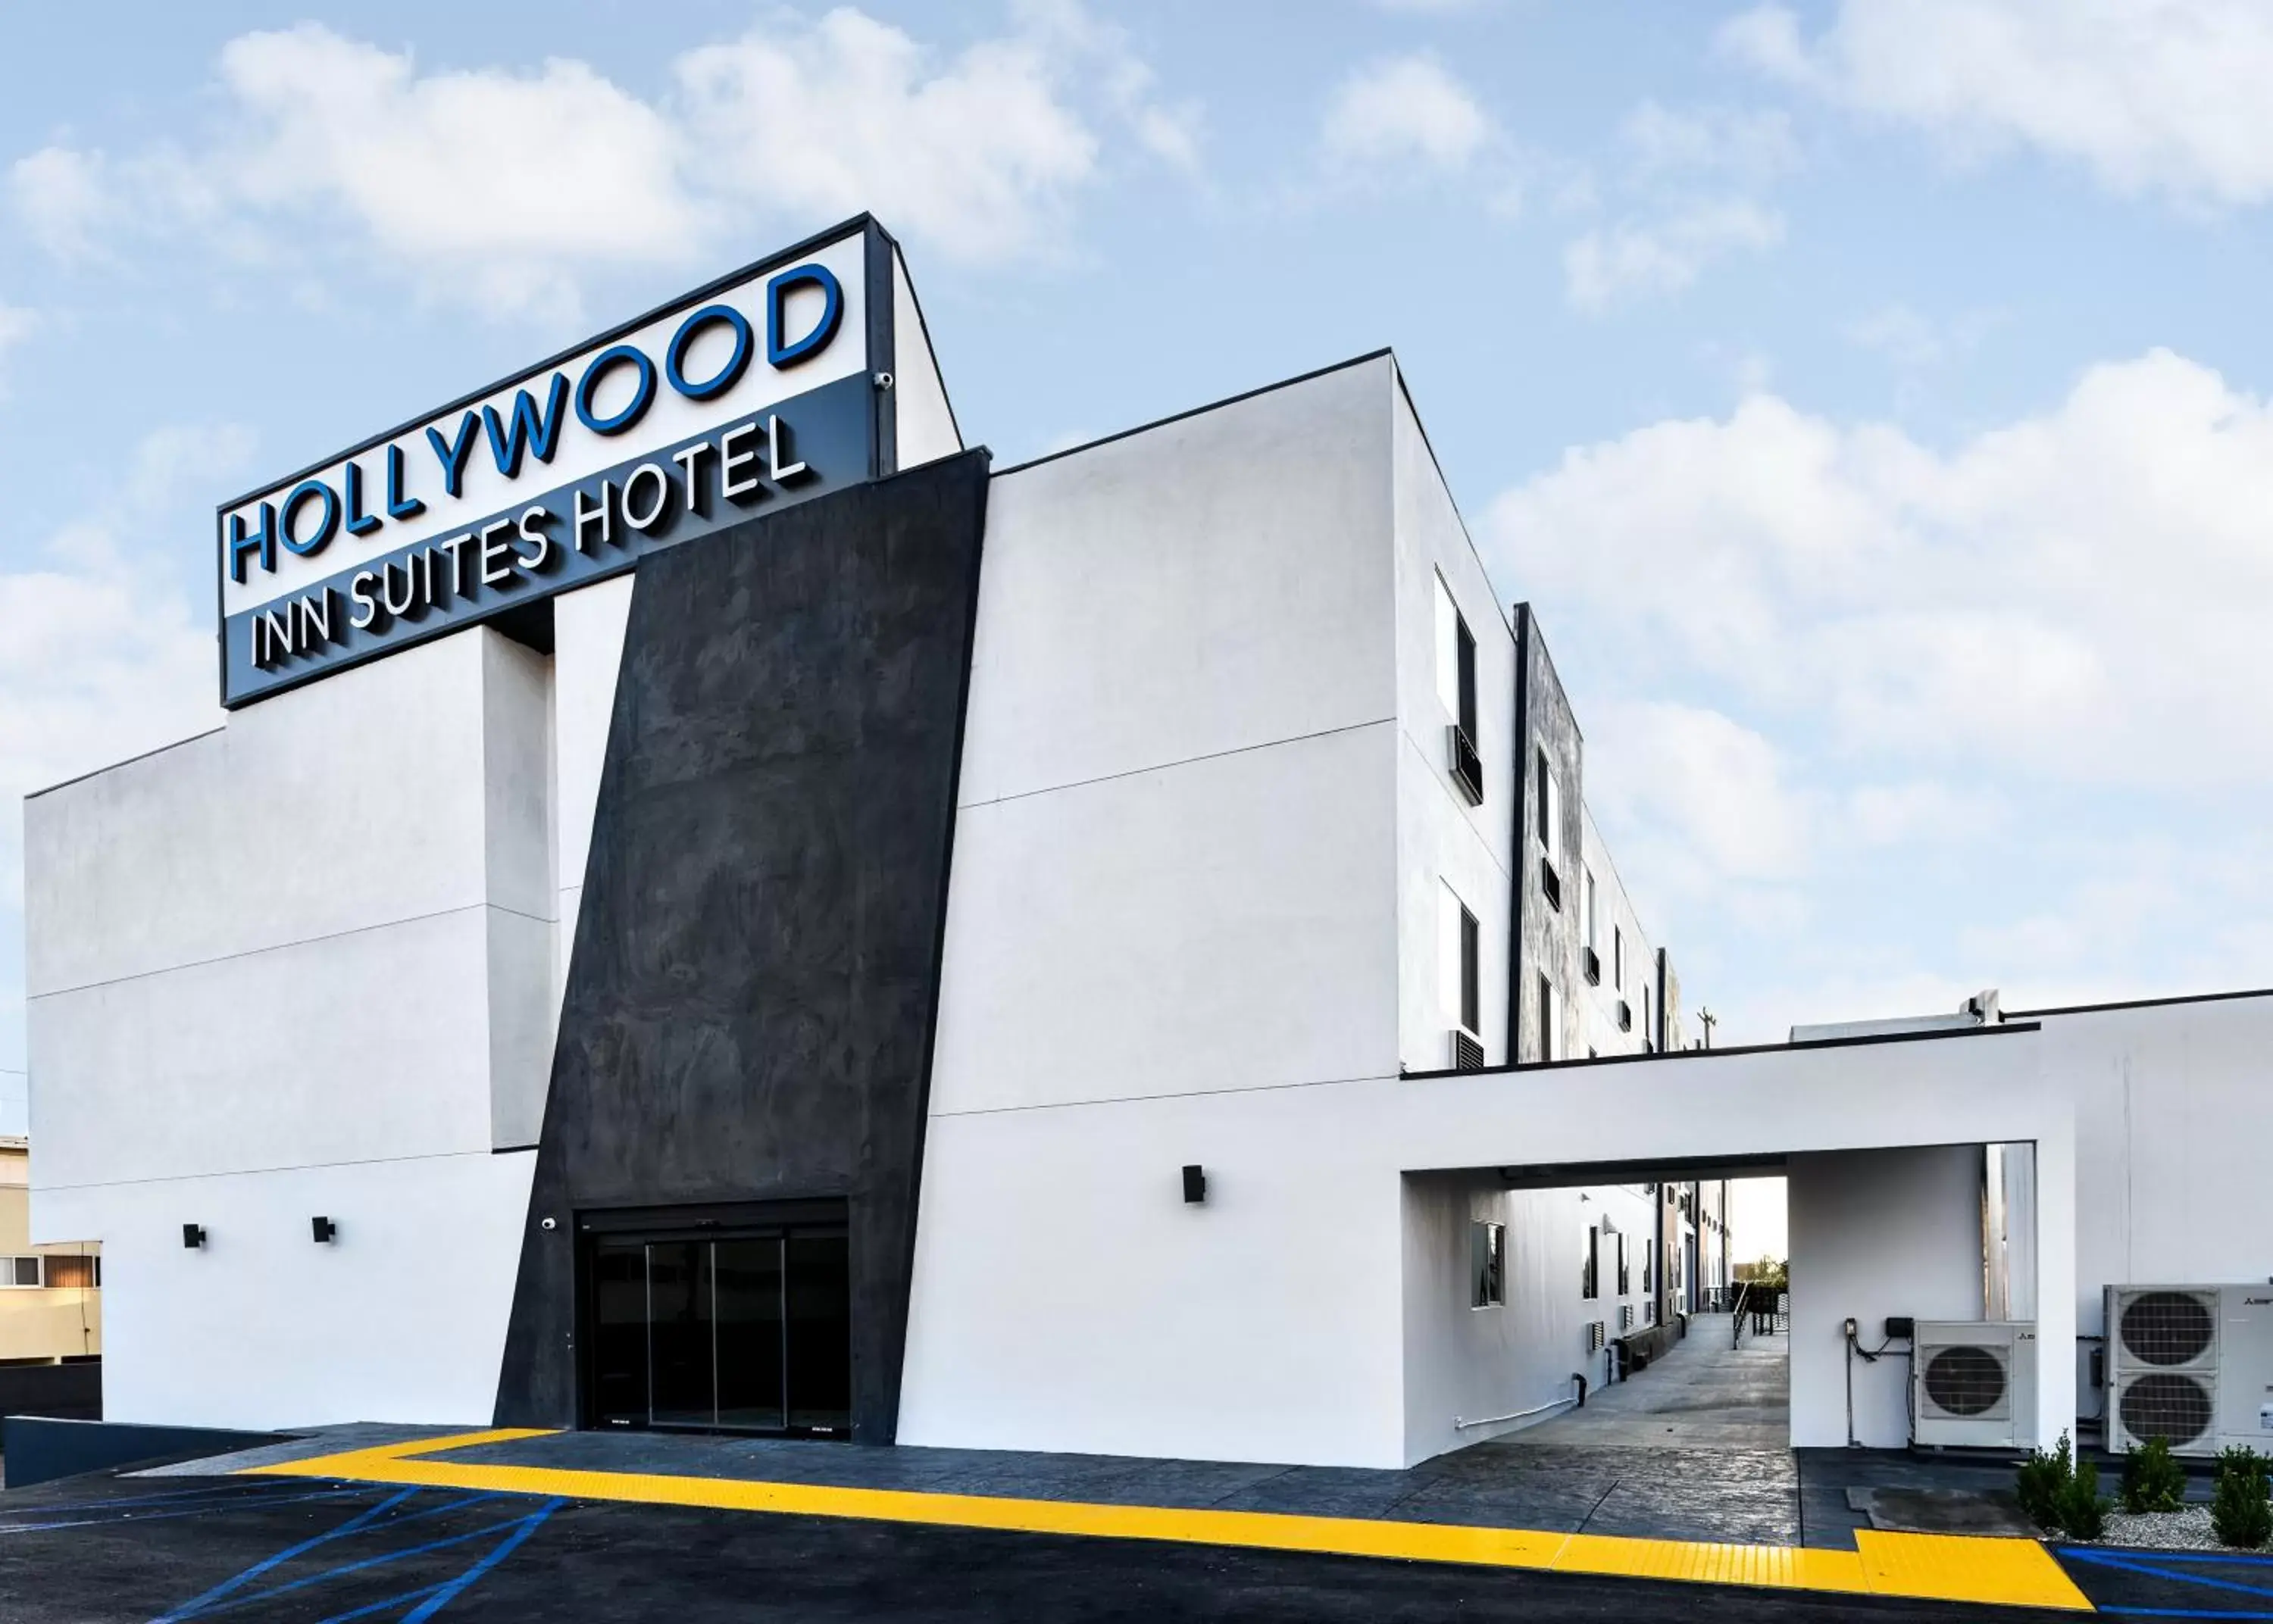 Facade/entrance, Property Building in Hollywood Inn Suites Hotel